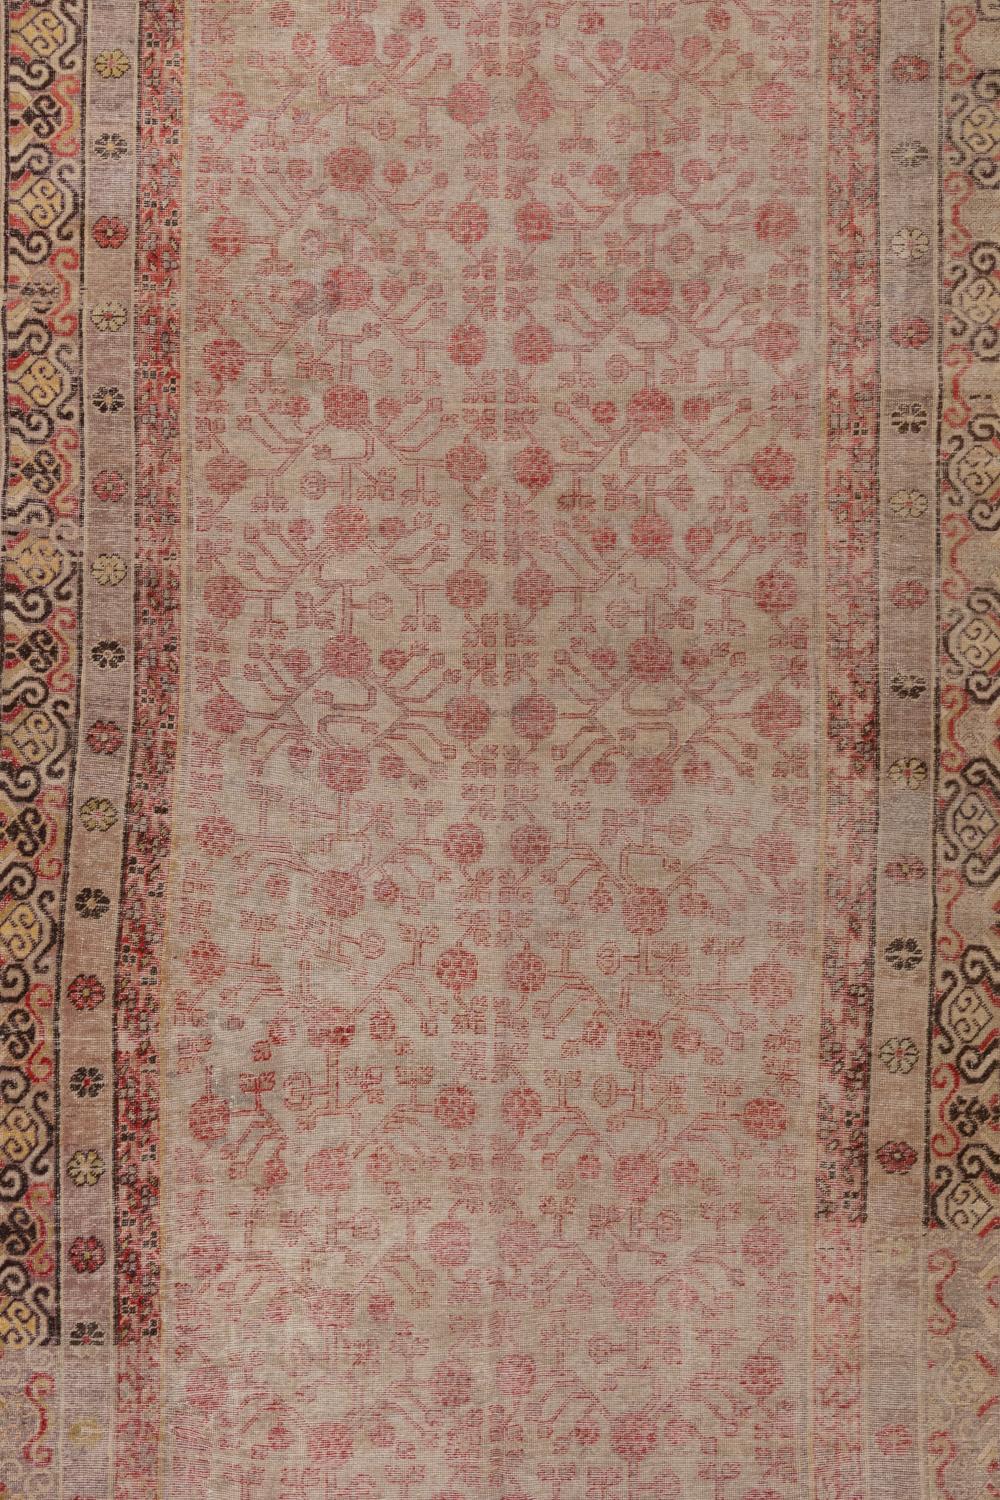 Age: late 19th century

Pile: Low

Wear Notes: 4

Material: Wool on Cotton 

Vintage rugs are made by hand over the course of months, sometimes years. Their imperfections and wear are evidence of the hard working human hands that made them